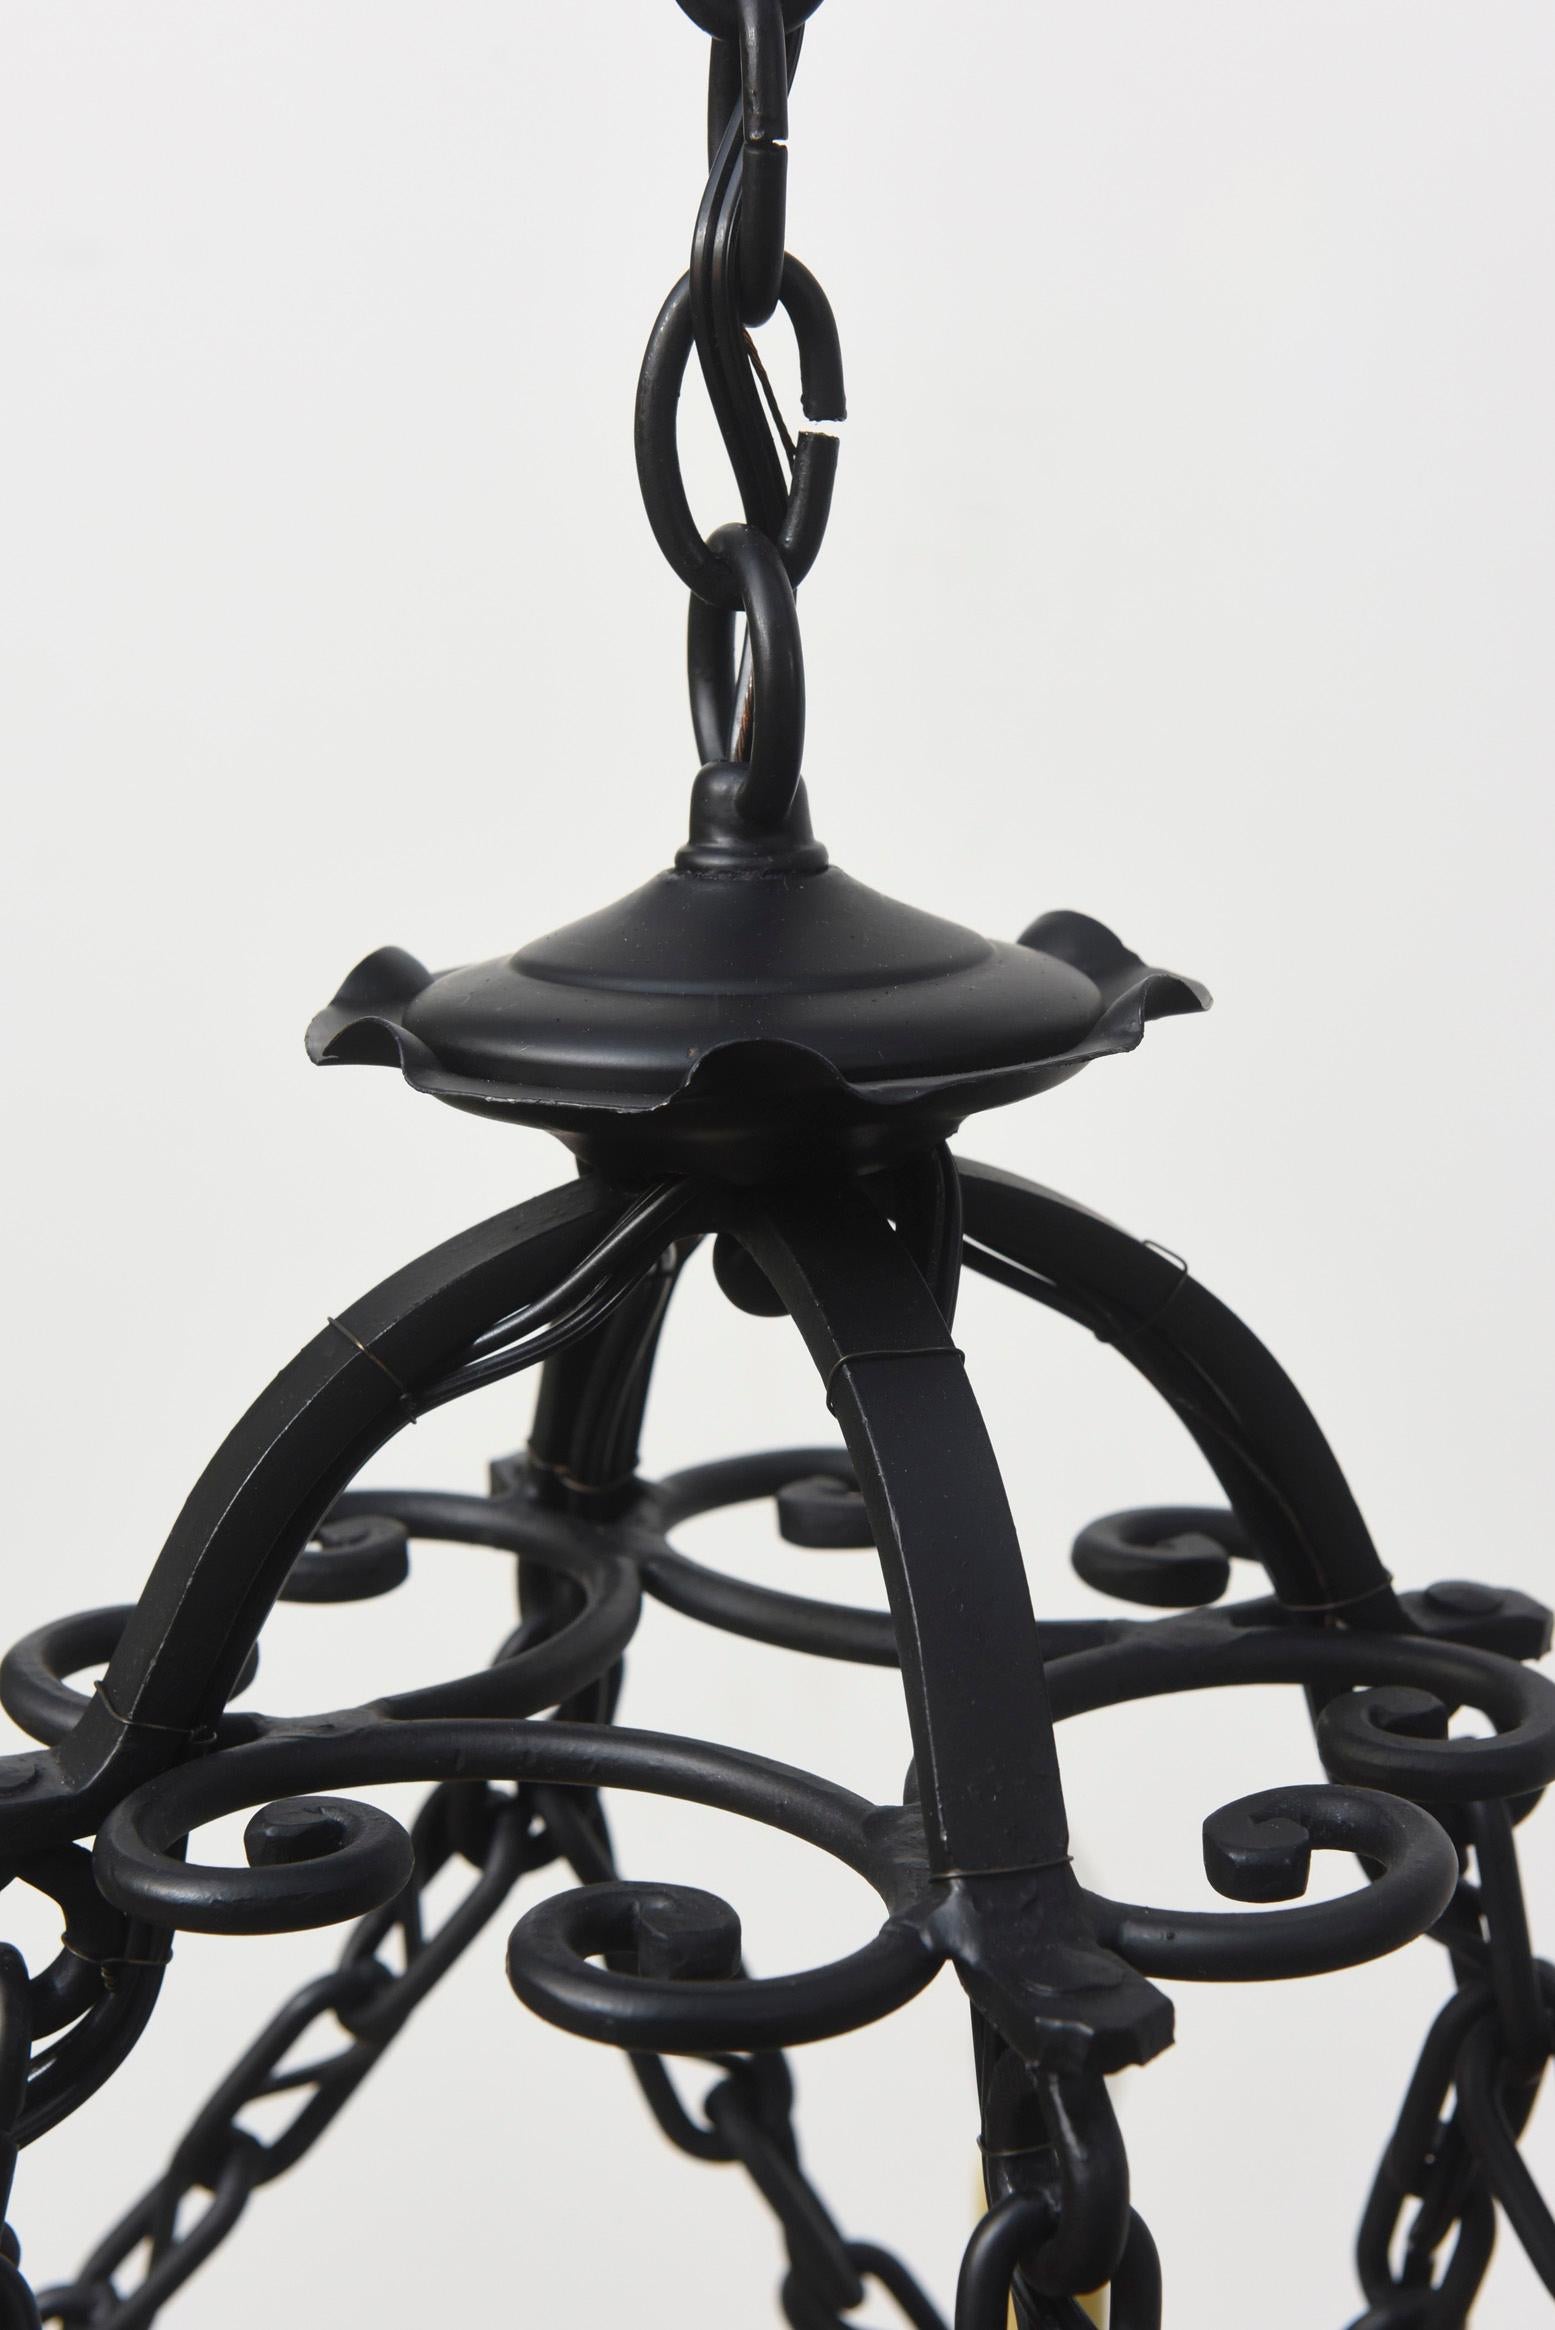 Wrought iron chandelier, ideal for an oval or rectangular dining table, a rustic open living room, or over a kitchen island. 8 lights. Completely restored and repainted. Rewired and ready to hang. Can be lengthened, or potentially be shortened to